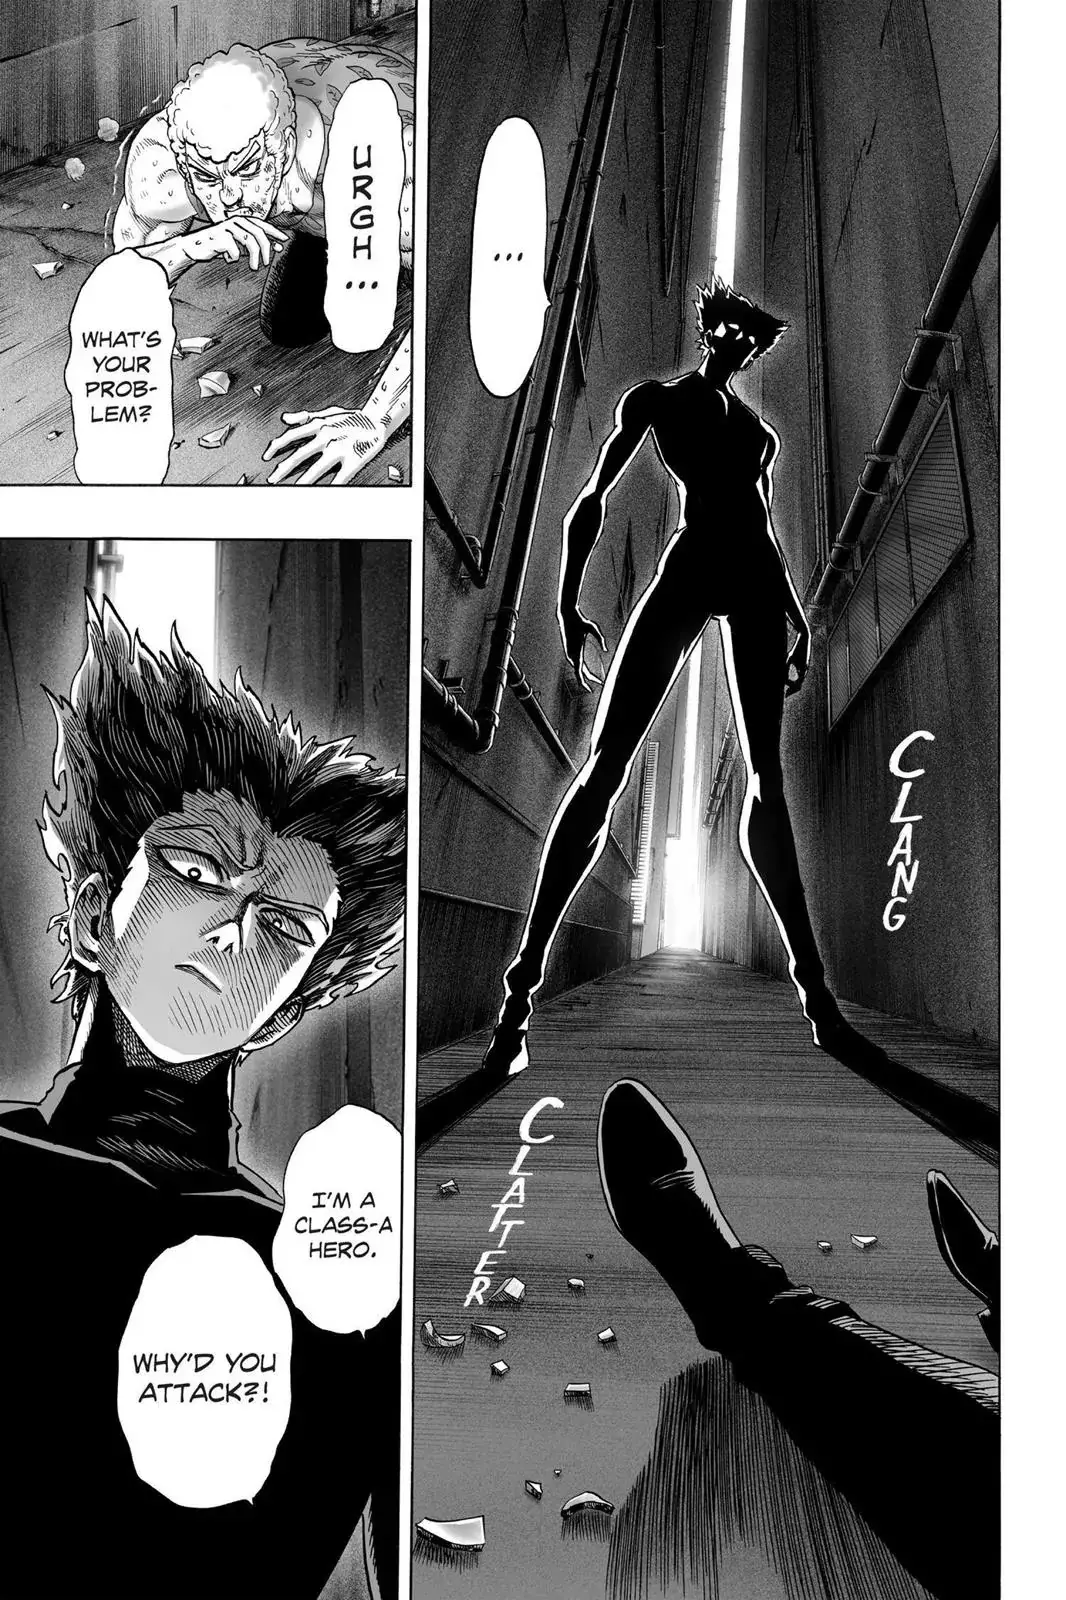 One Punch Man Chapter 45, READ One Punch Man Chapter 45 ONLINE, lost in the cloud genre,lost in the cloud gif,lost in the cloud girl,lost in the cloud goods,lost in the cloud goodreads,lost in the cloud,lost ark cloud gaming,lost odyssey cloud gaming,lost in the cloud fanart,lost in the cloud fanfic,lost in the cloud fandom,lost in the cloud first kiss,lost in the cloud font,lost in the cloud ending,lost in the cloud episode 97,lost in the cloud edit,lost in the cloud explained,lost in the cloud dog,lost in the cloud discord server,lost in the cloud desktop wallpaper,lost in the cloud drawing,can't find my cloud on network,lost in the cloud characters,lost in the cloud chapter 93 release date,lost in the cloud birthday,lost in the cloud birthday art,lost in the cloud background,lost in the cloud banner,lost in the clouds meaning,what is the black cloud in lost,lost in the cloud ao3,lost in the cloud anime,lost in the cloud art,lost in the cloud author twitter,lost in the cloud author instagram,lost in the cloud artist,lost in the cloud acrylic stand,lost in the cloud artist twitter,lost in the cloud art style,lost in the cloud analysis